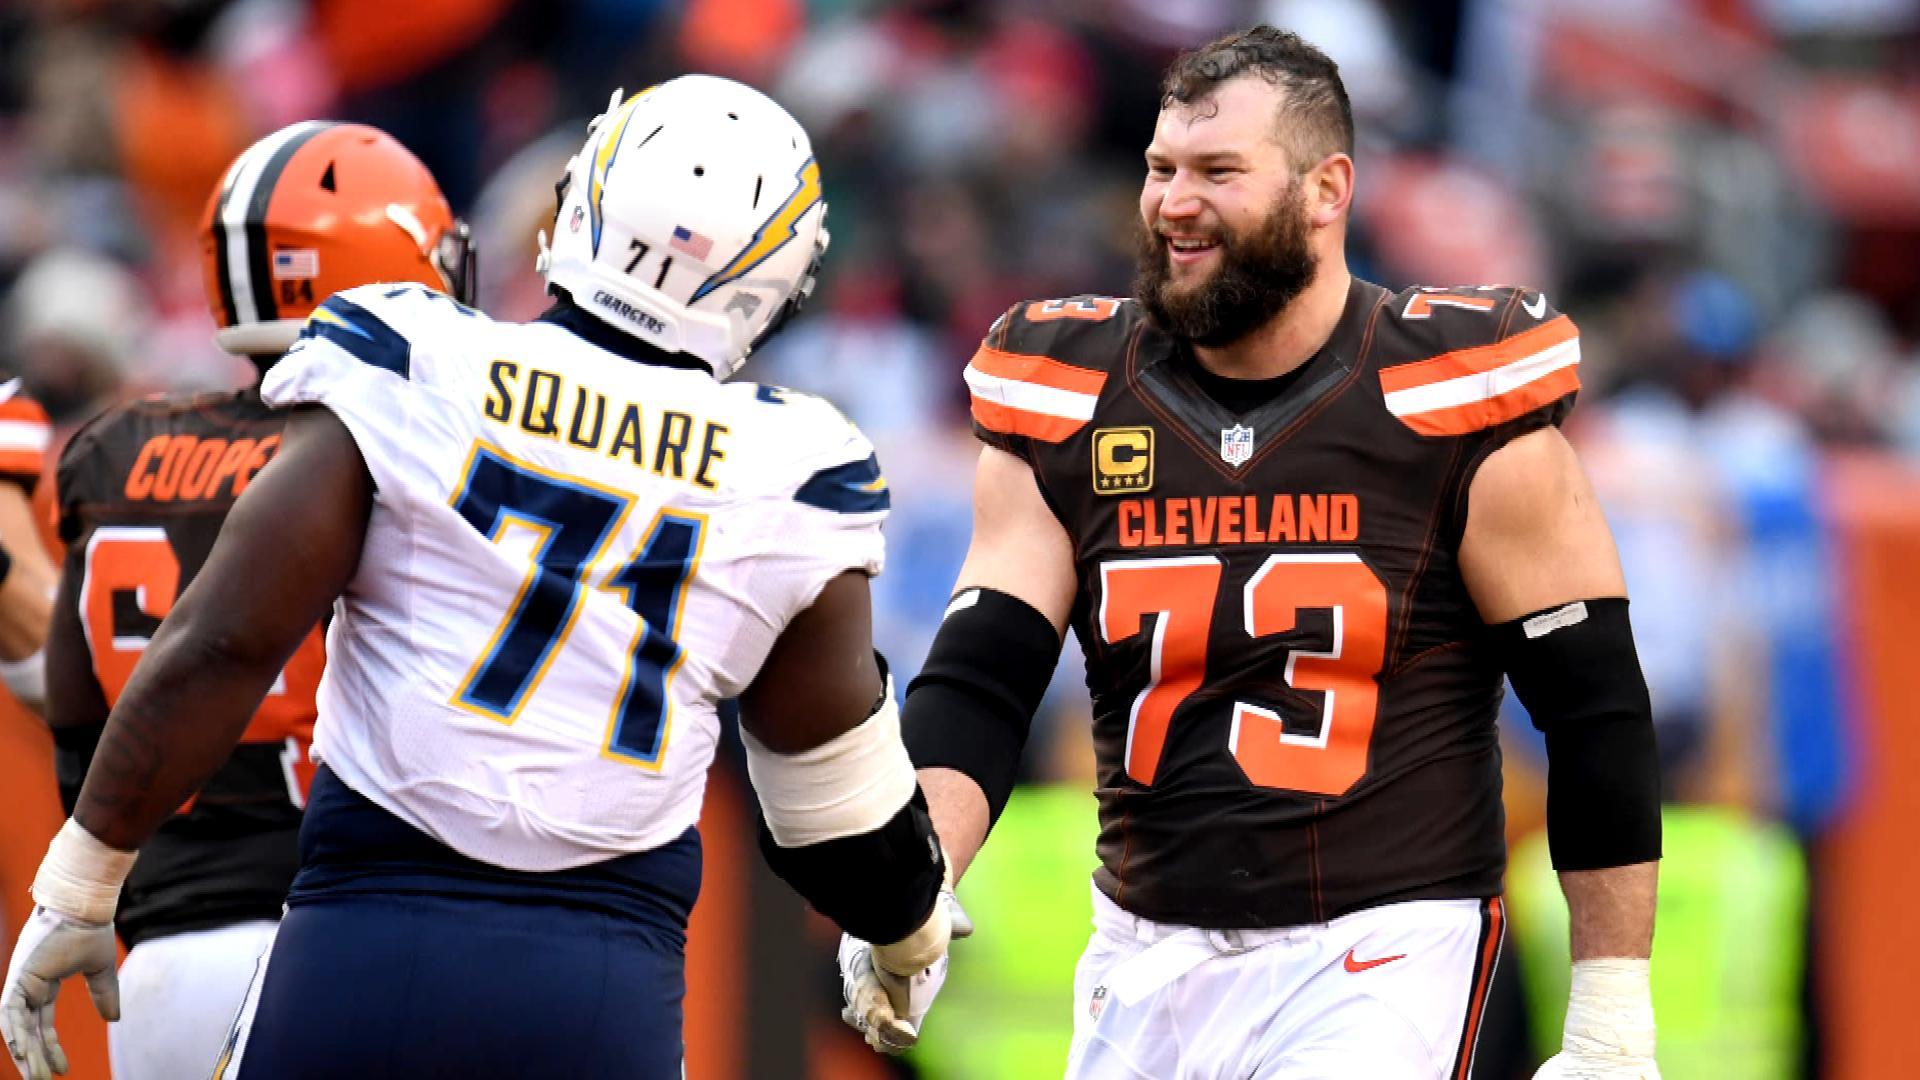 Browns' Joe Thomas once met new quarterback for first time